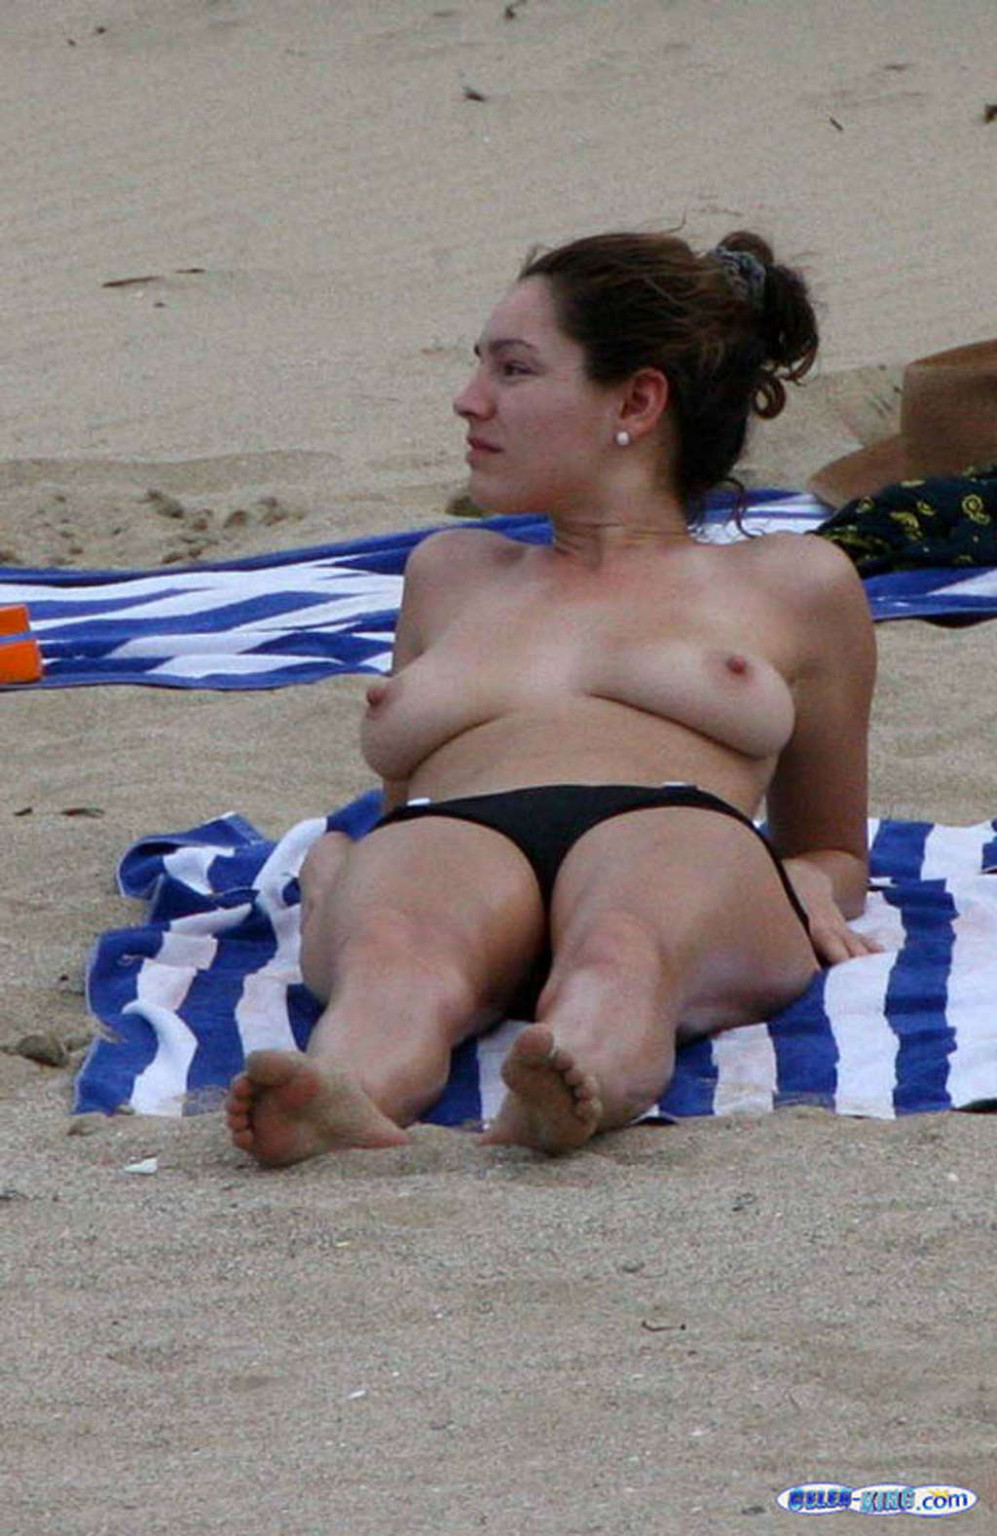 Kelly Brook showing her sexy legs in skirt and huge nude tits on beach #75358199